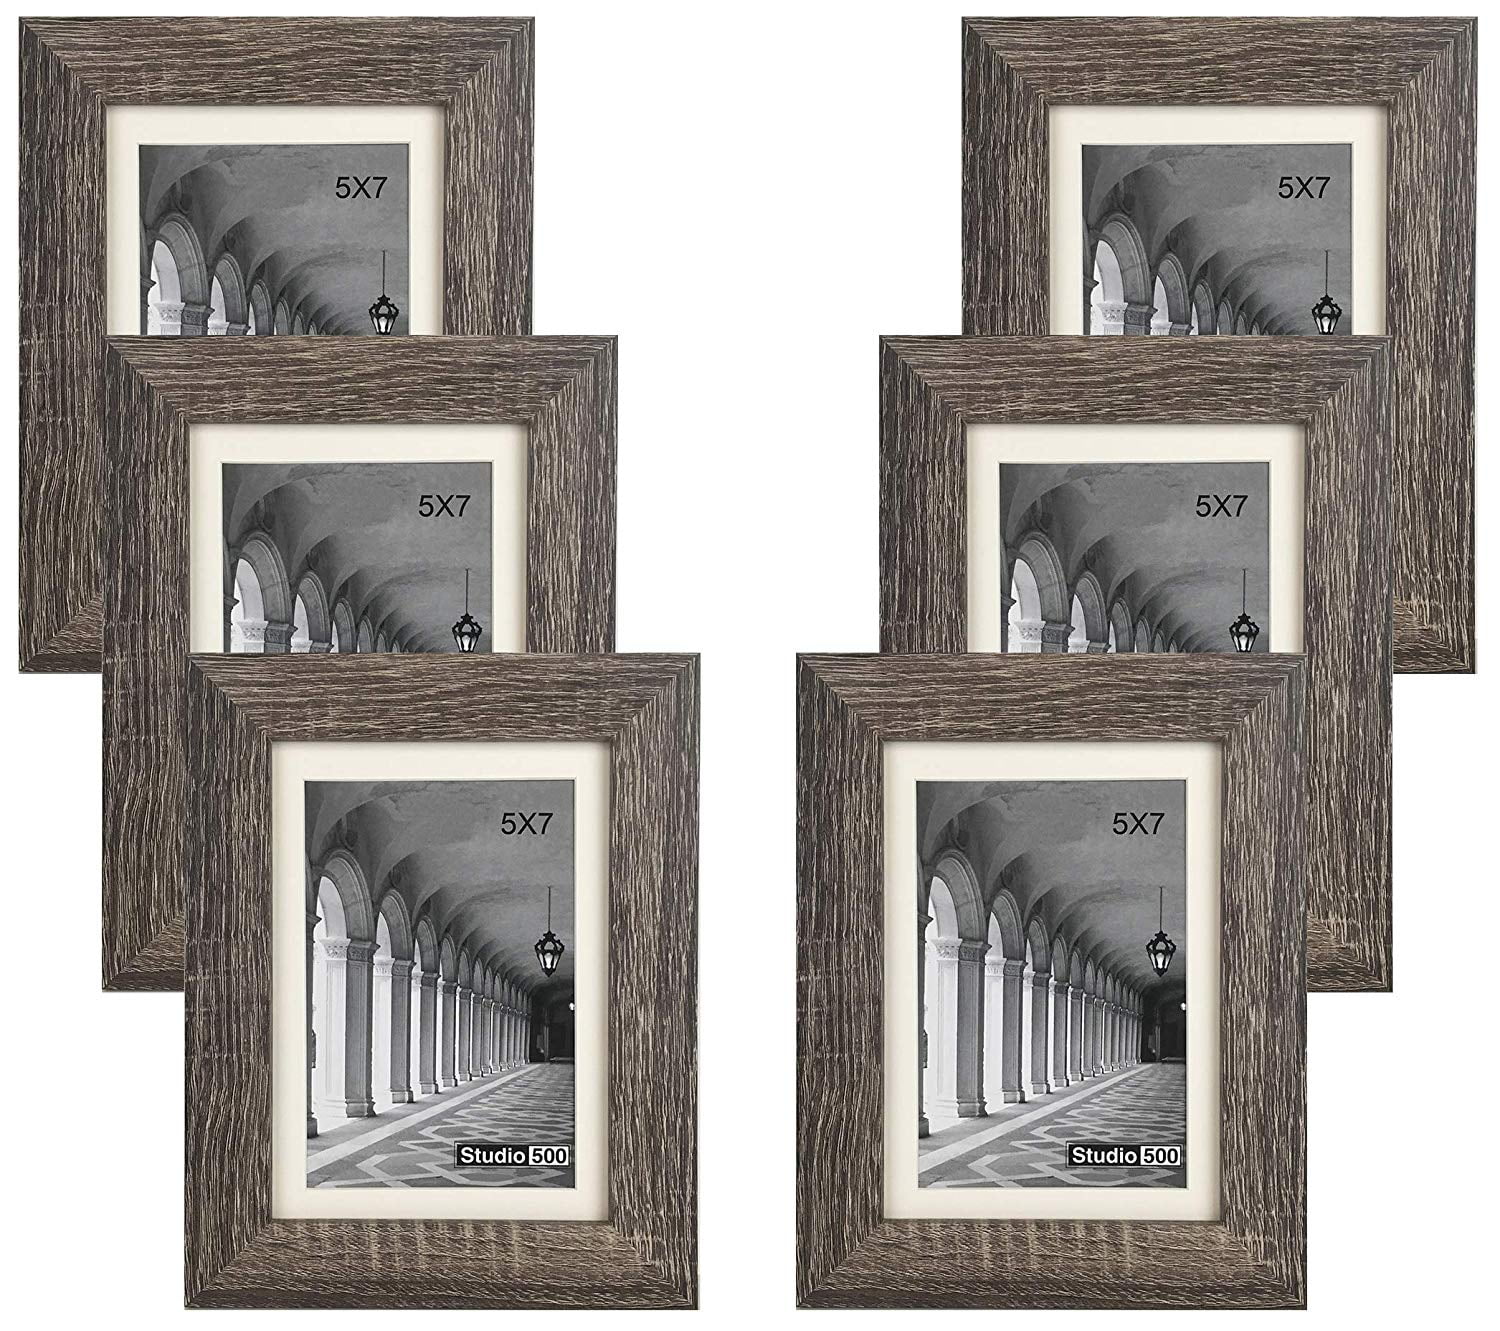 STUDIO 500 VALUE 6-PACK~11x17-inch Distressed Grey Contemporary Picture Frames 